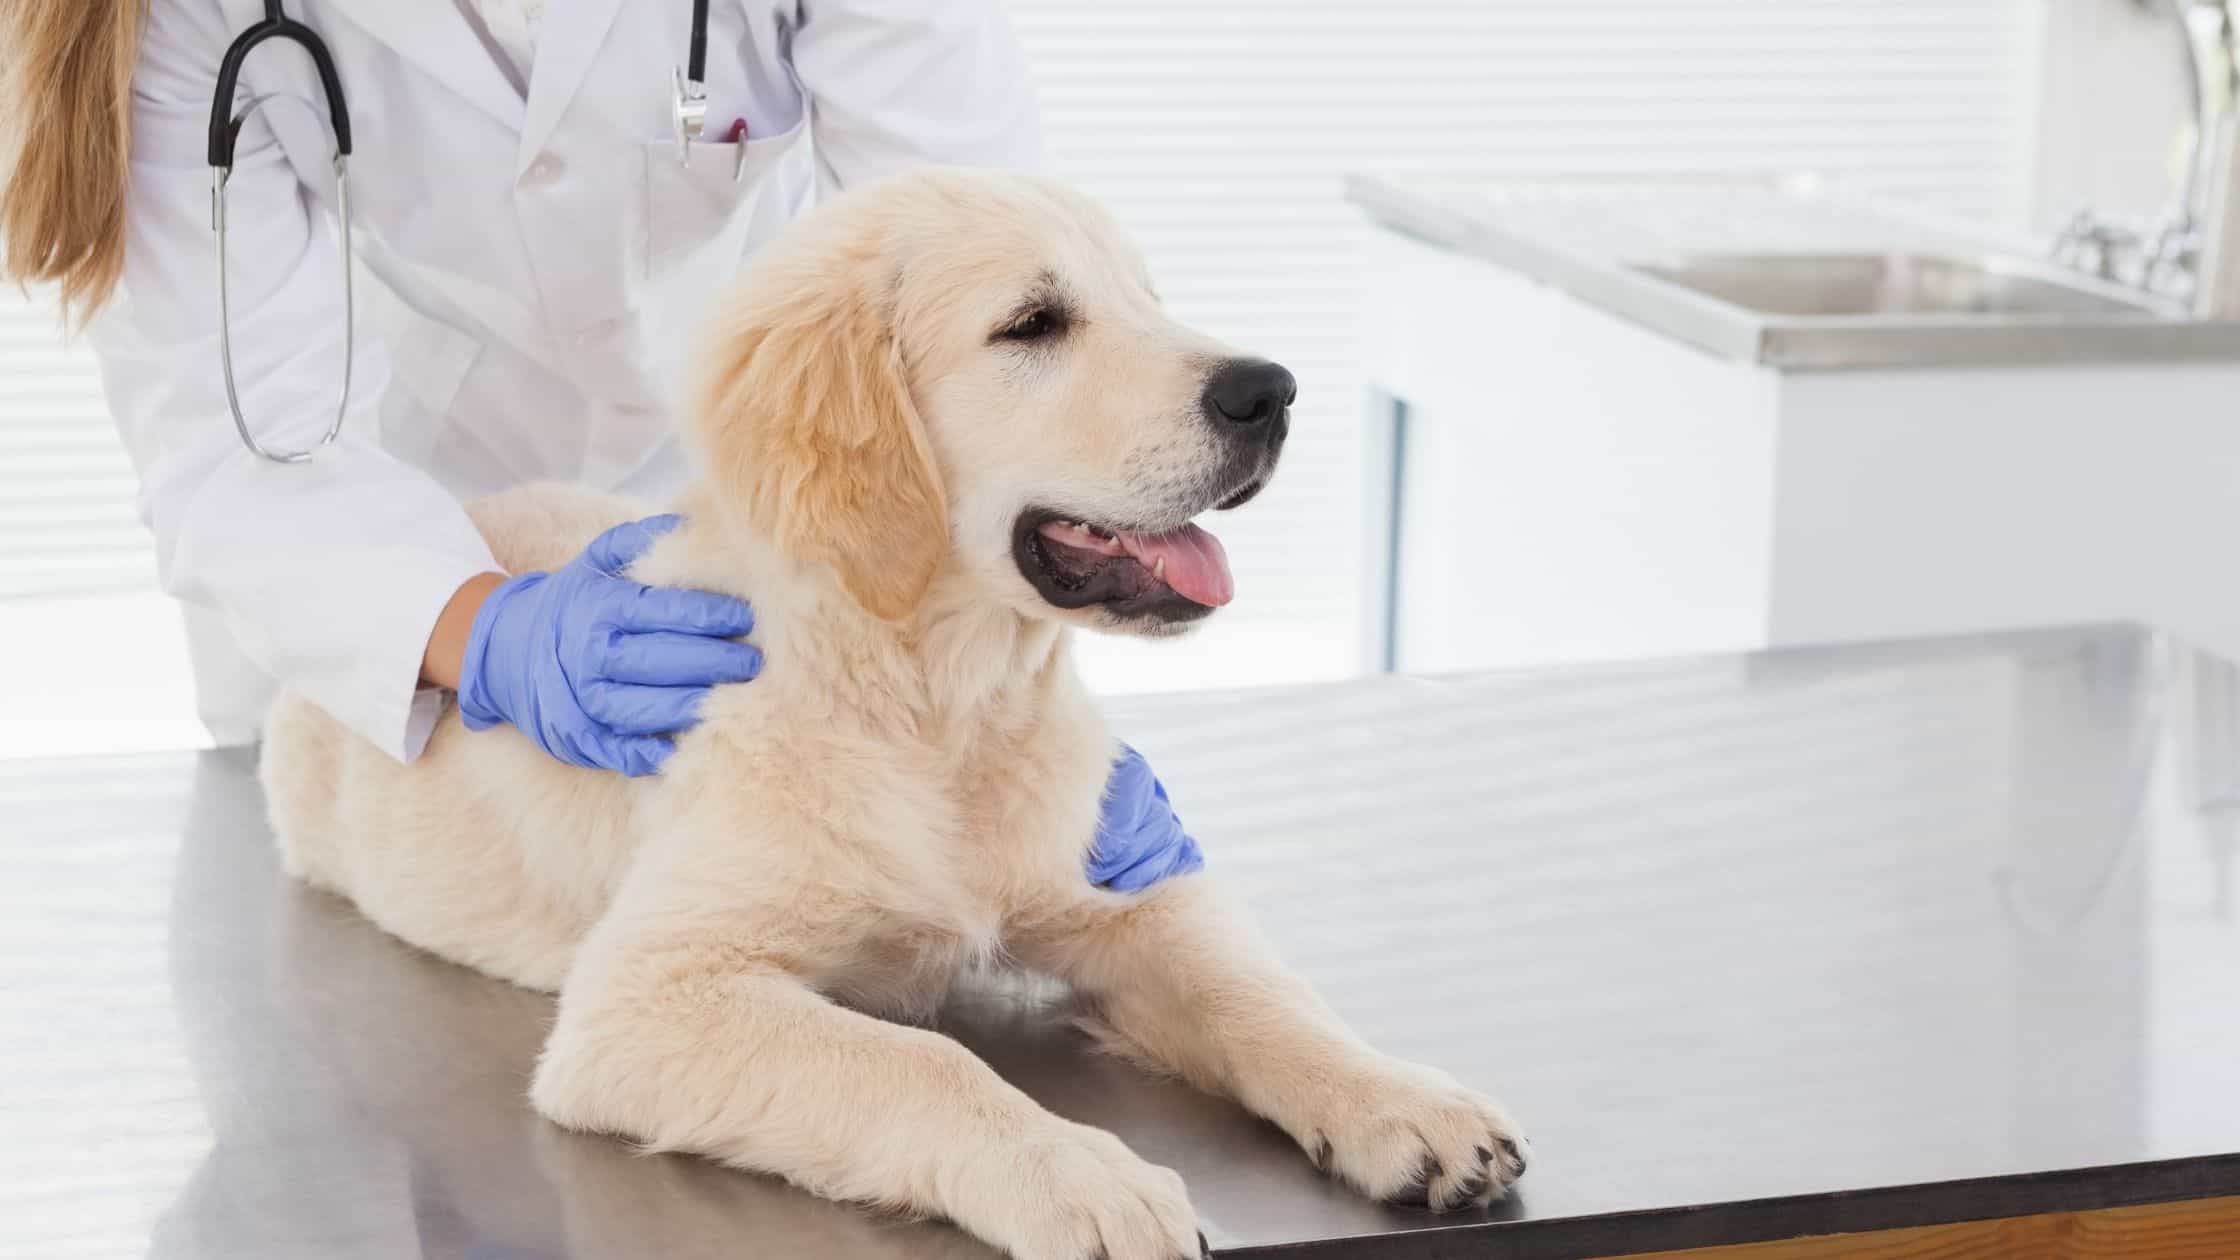 Pet Insurance: What Is, How Much, Coverage, and More